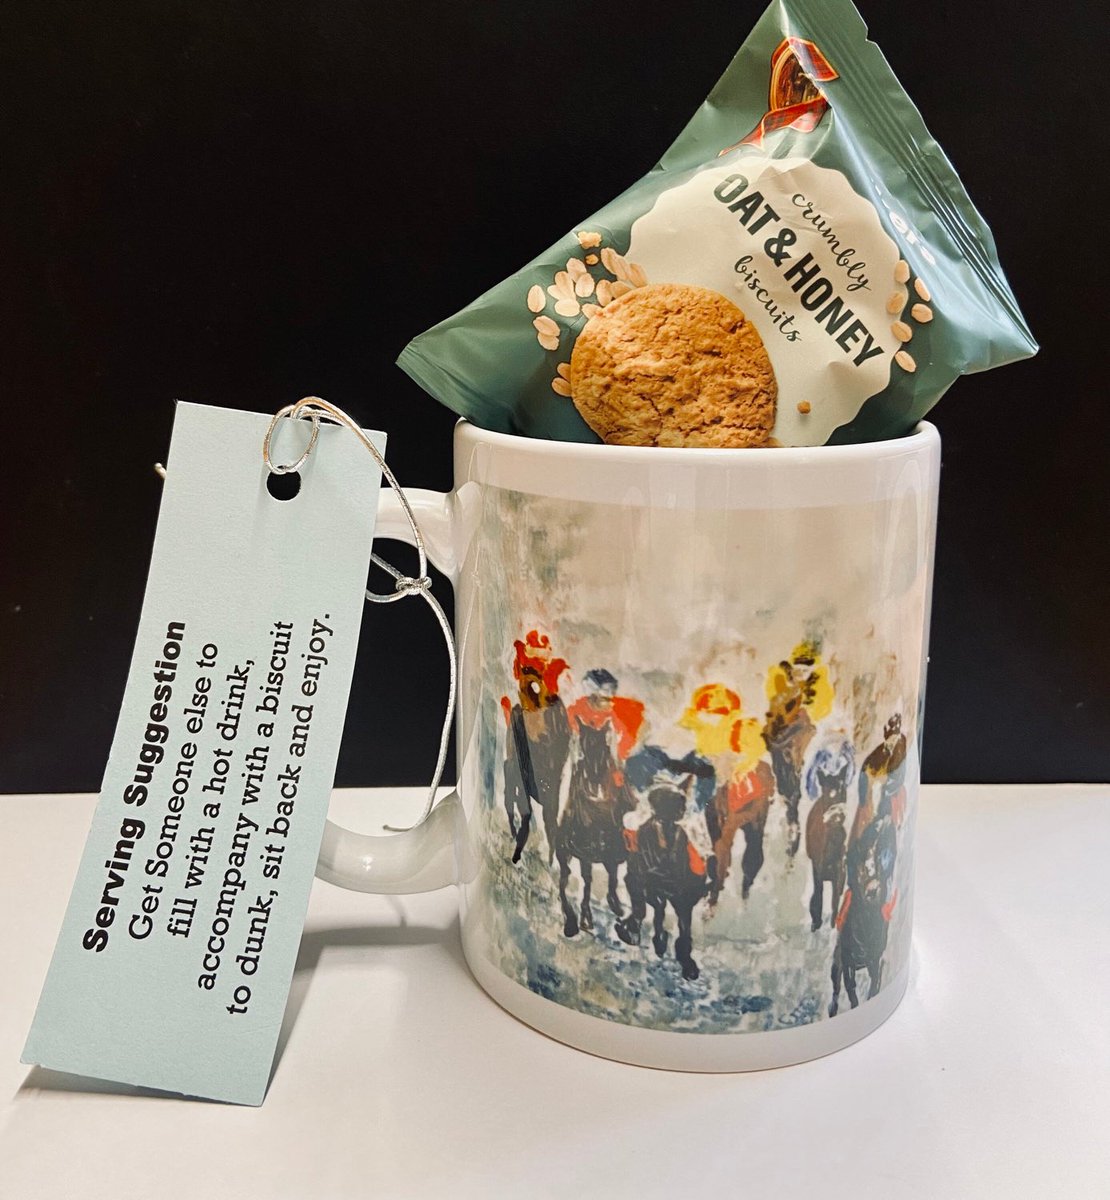 And there off!
Horse Racing Coffee Mug
      etsy.me/3fX8vMP

For more unique gift ideas visit my Etsy shop GranvilleStudio.Etsy.com
The artwork used is produced by myself and my Mam #OwstonArt

#HorseRacing #mhhsbd #shopearly #ChristmasGiftIdea #etsyuk #firsttmaster